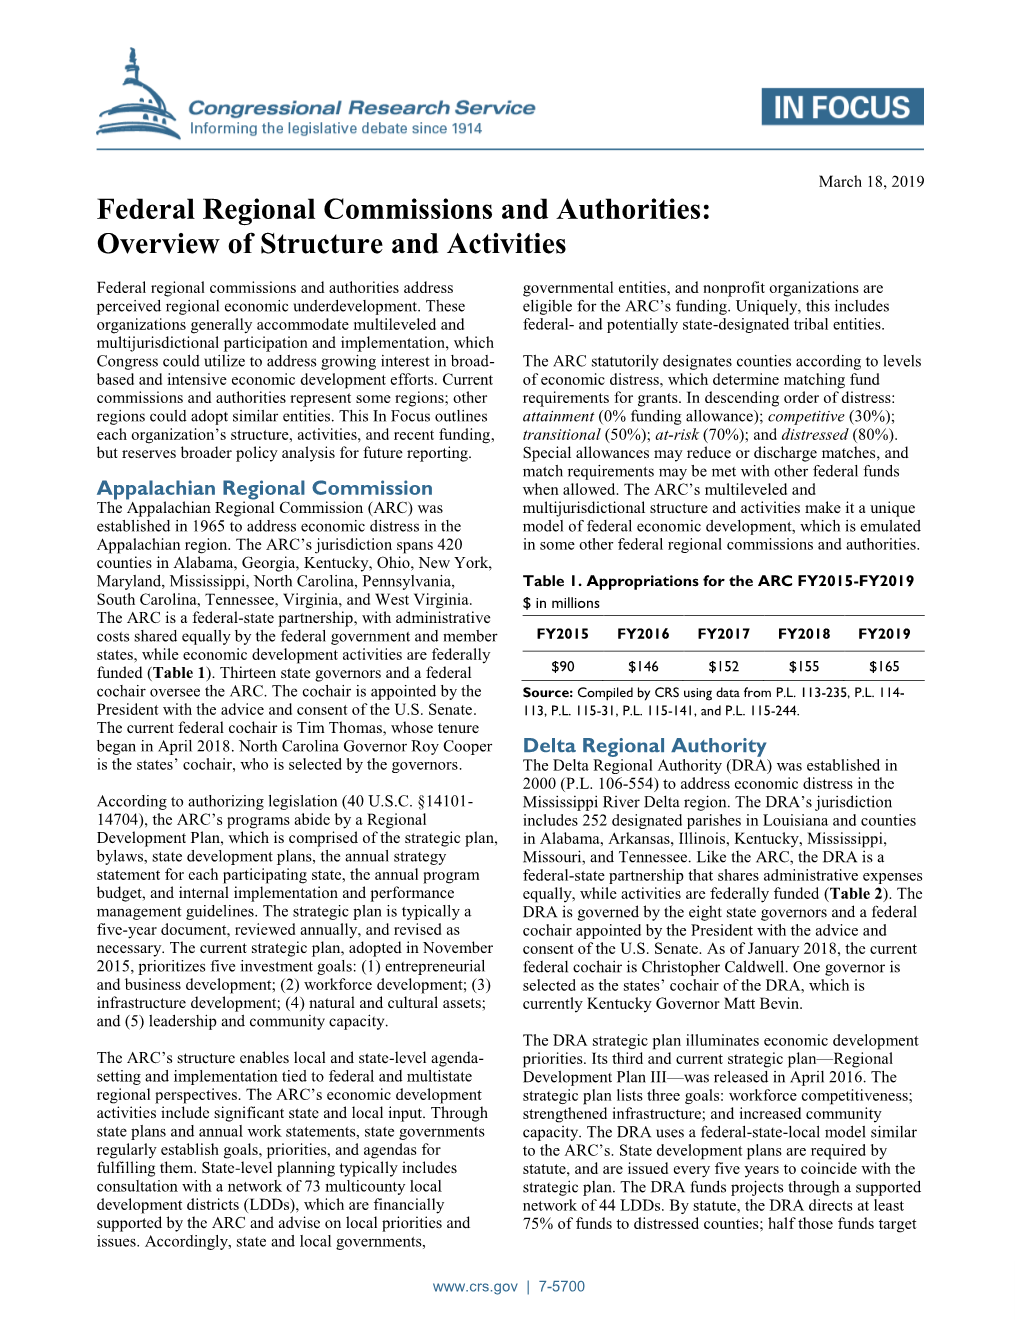 Federal Regional Commissions and Authorities: Overview of Structure and Activities